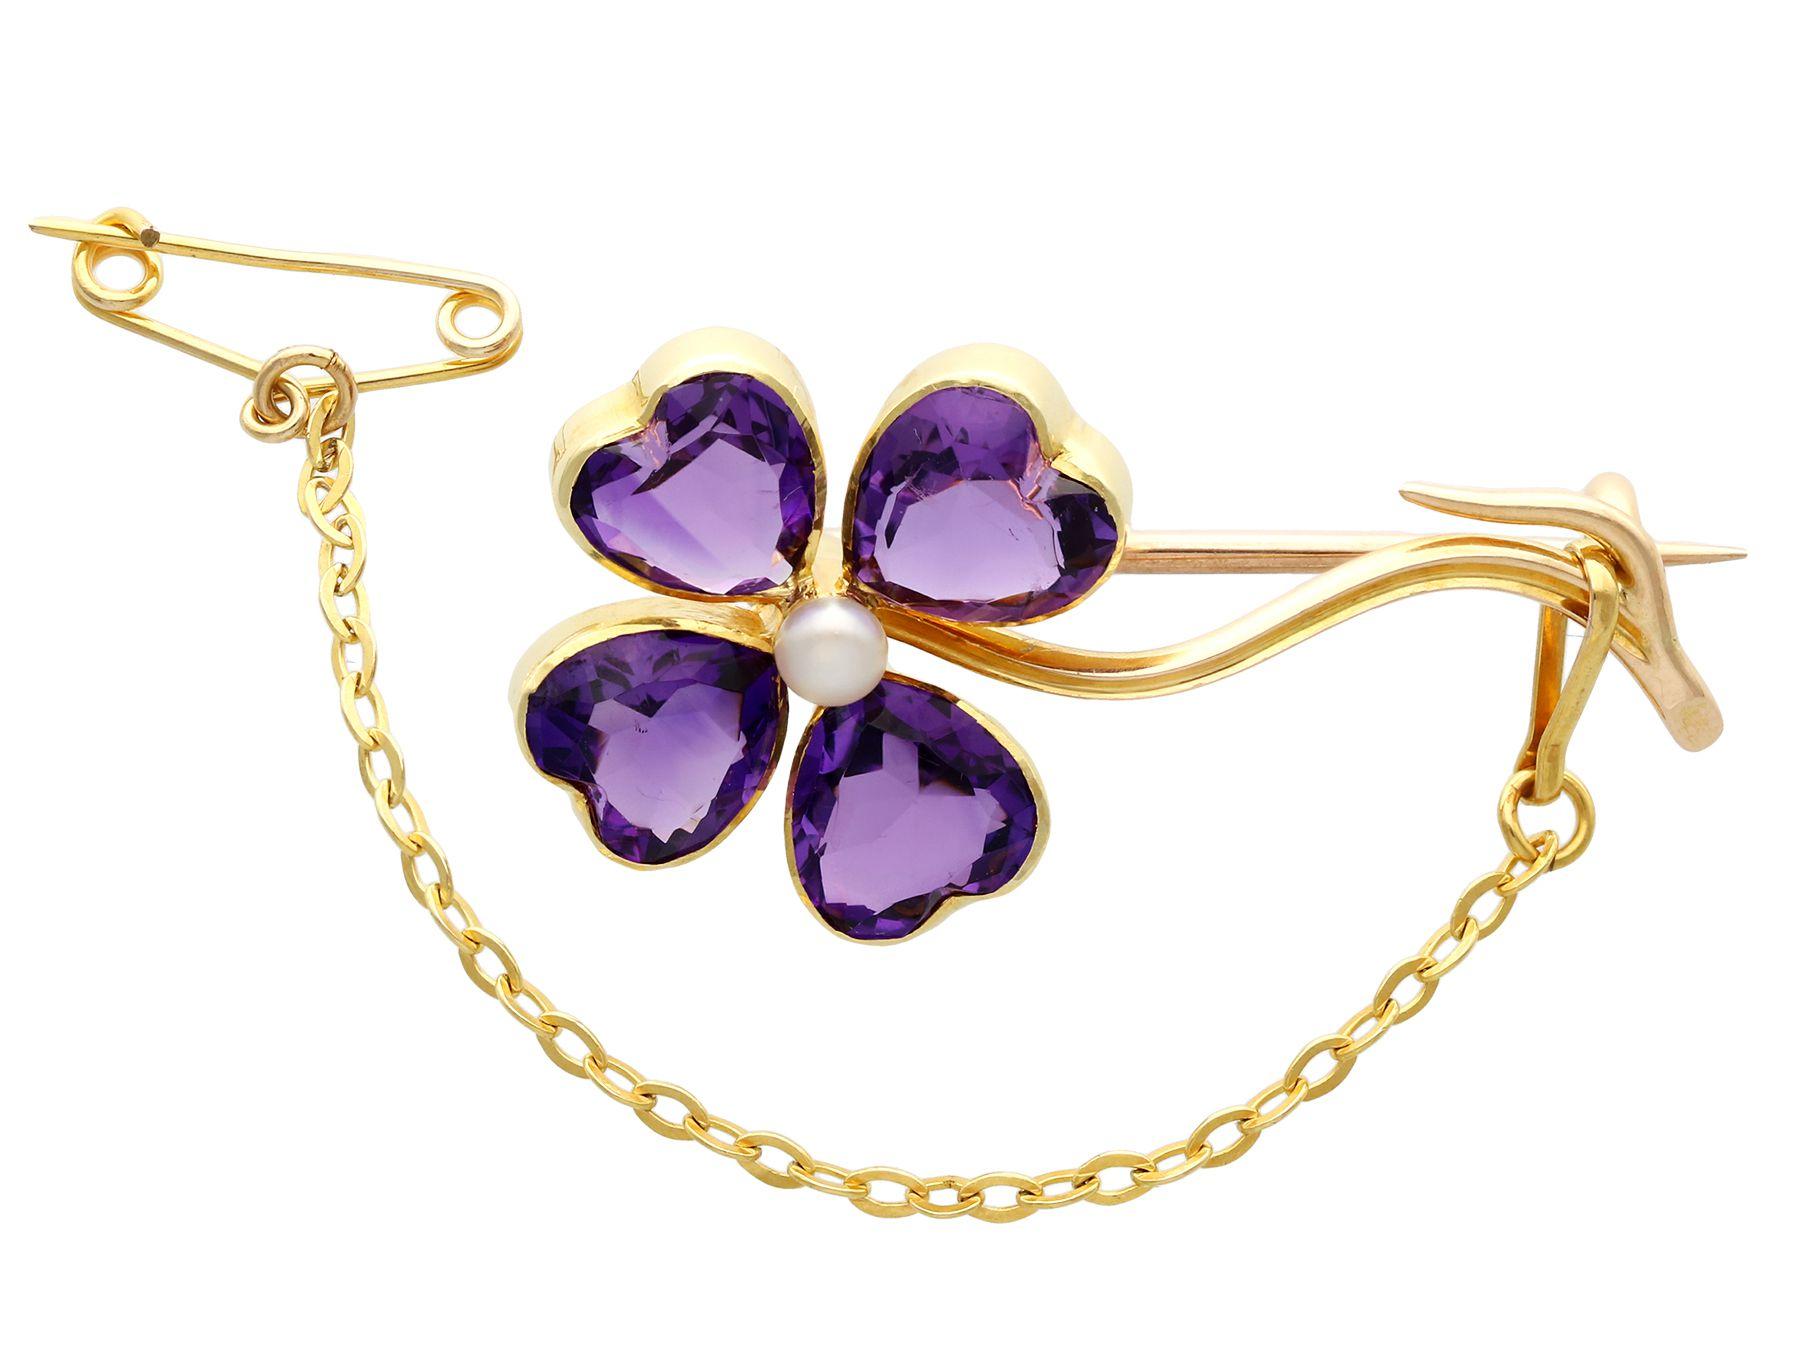 Antique 4.25 Carat Amethyst and Pearl 15k Yellow Gold Four-Leaf Clover Brooch In Excellent Condition For Sale In Jesmond, Newcastle Upon Tyne